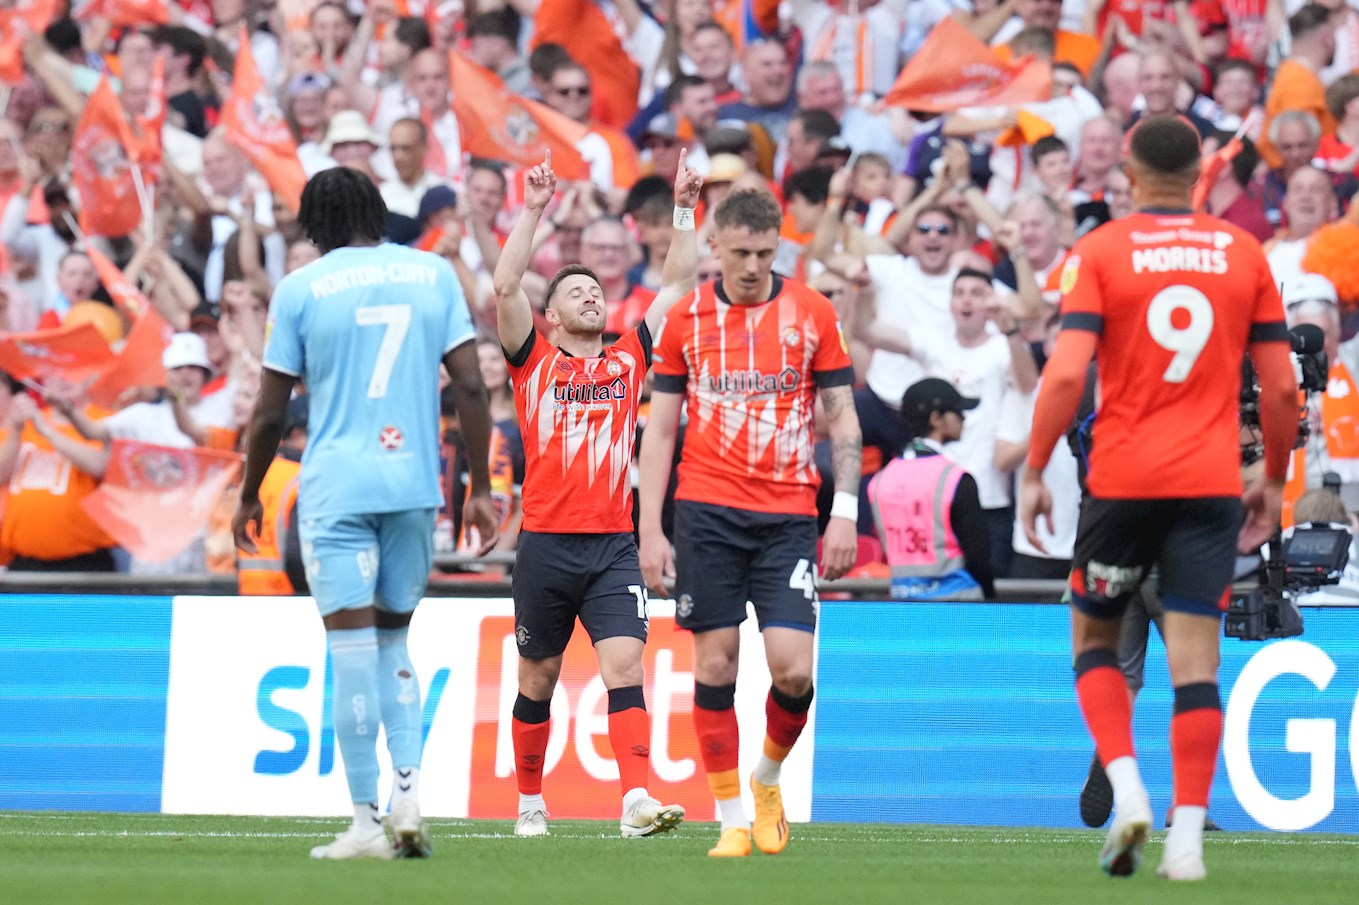 Play-off final report | Coventry City 1-1 Luton Town (5-6 on penalties) | News